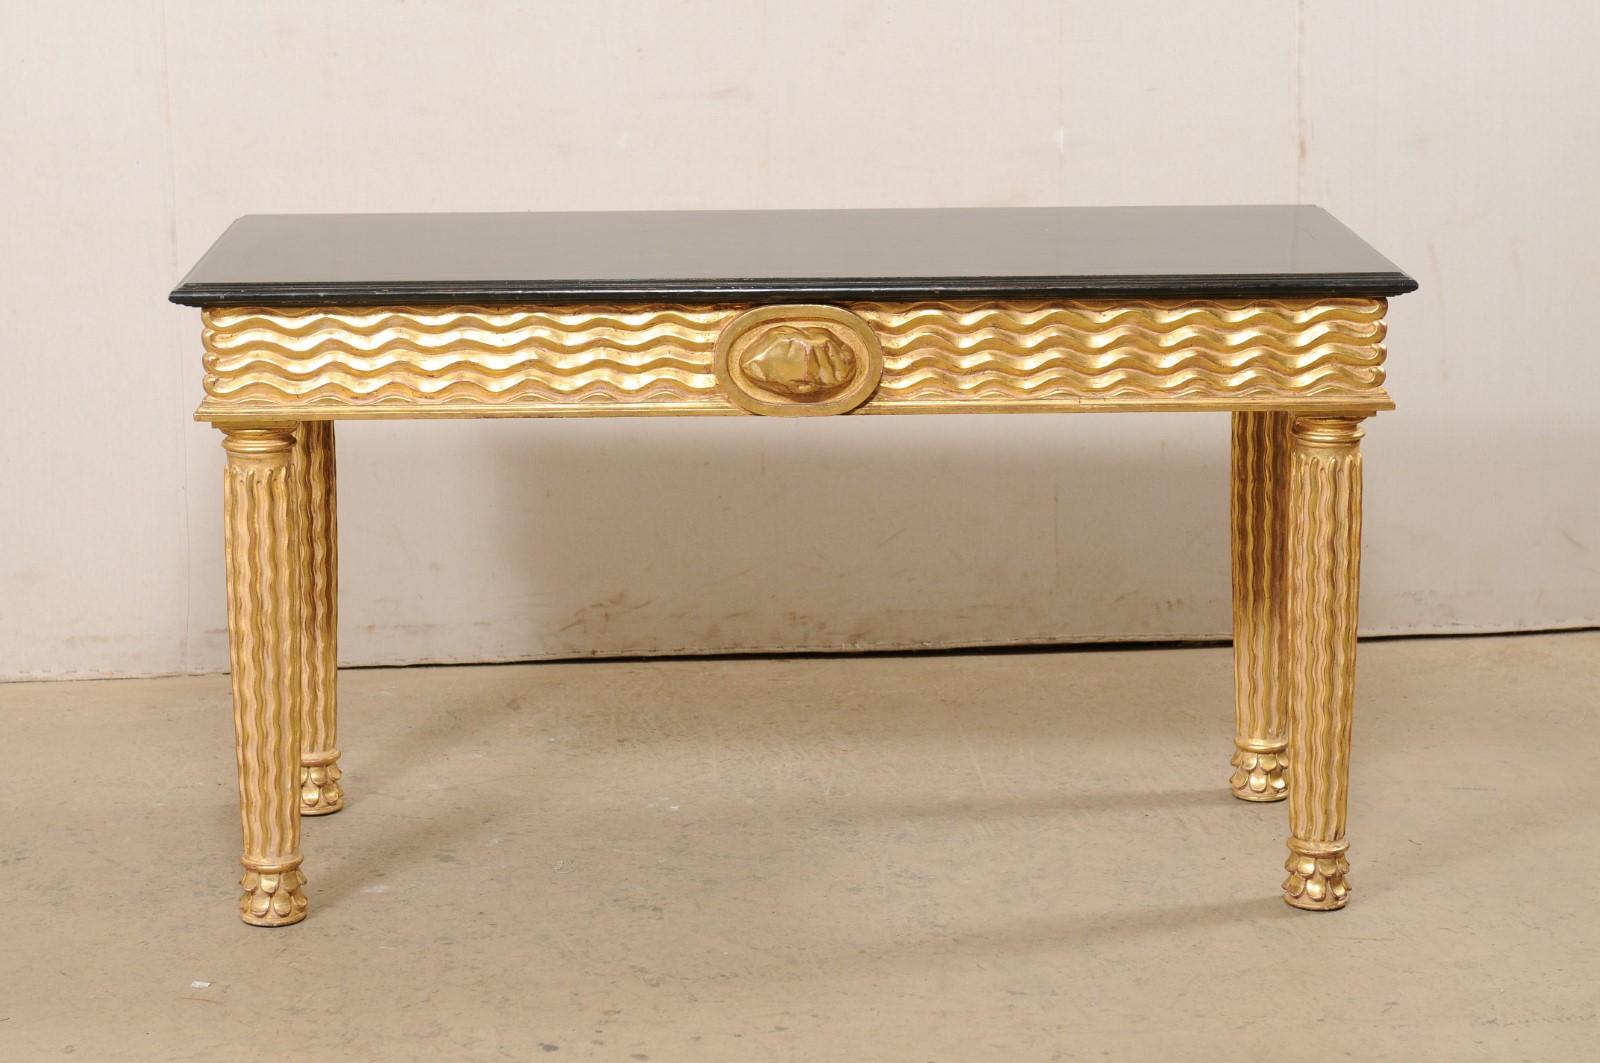 Italian Masterfully Hand-Carved Wooden Console Table with Real Gold Leafing For Sale 8